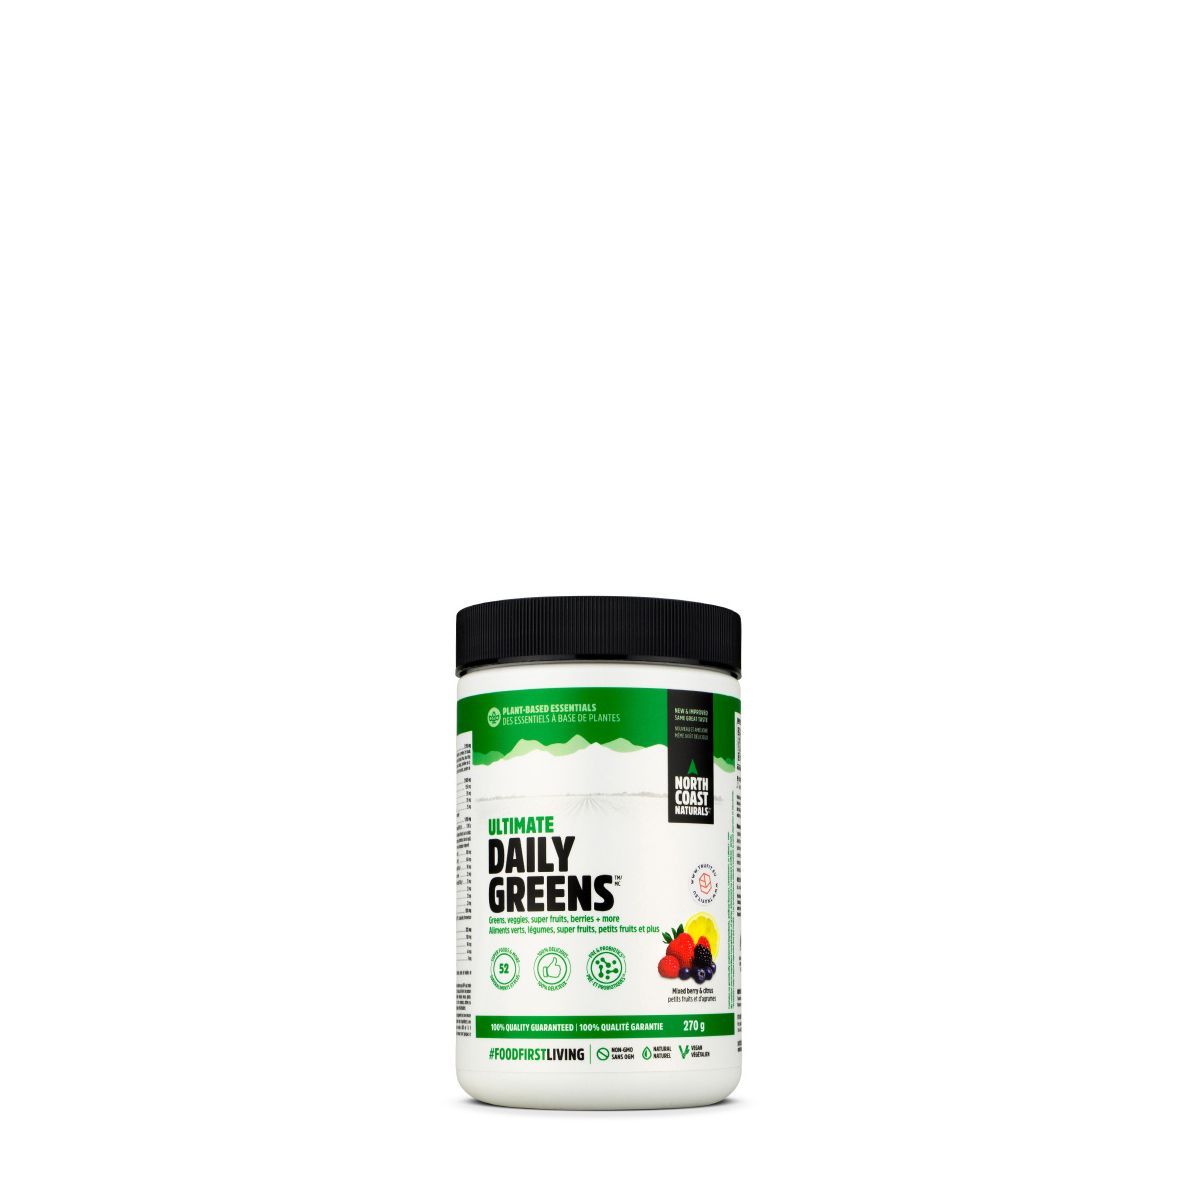 NORTH COAST - ULTIMATE DAILY GREENS - GREENS, VEGGIES, SUPER FRUITS, BERRIES AND MORE - 270 G